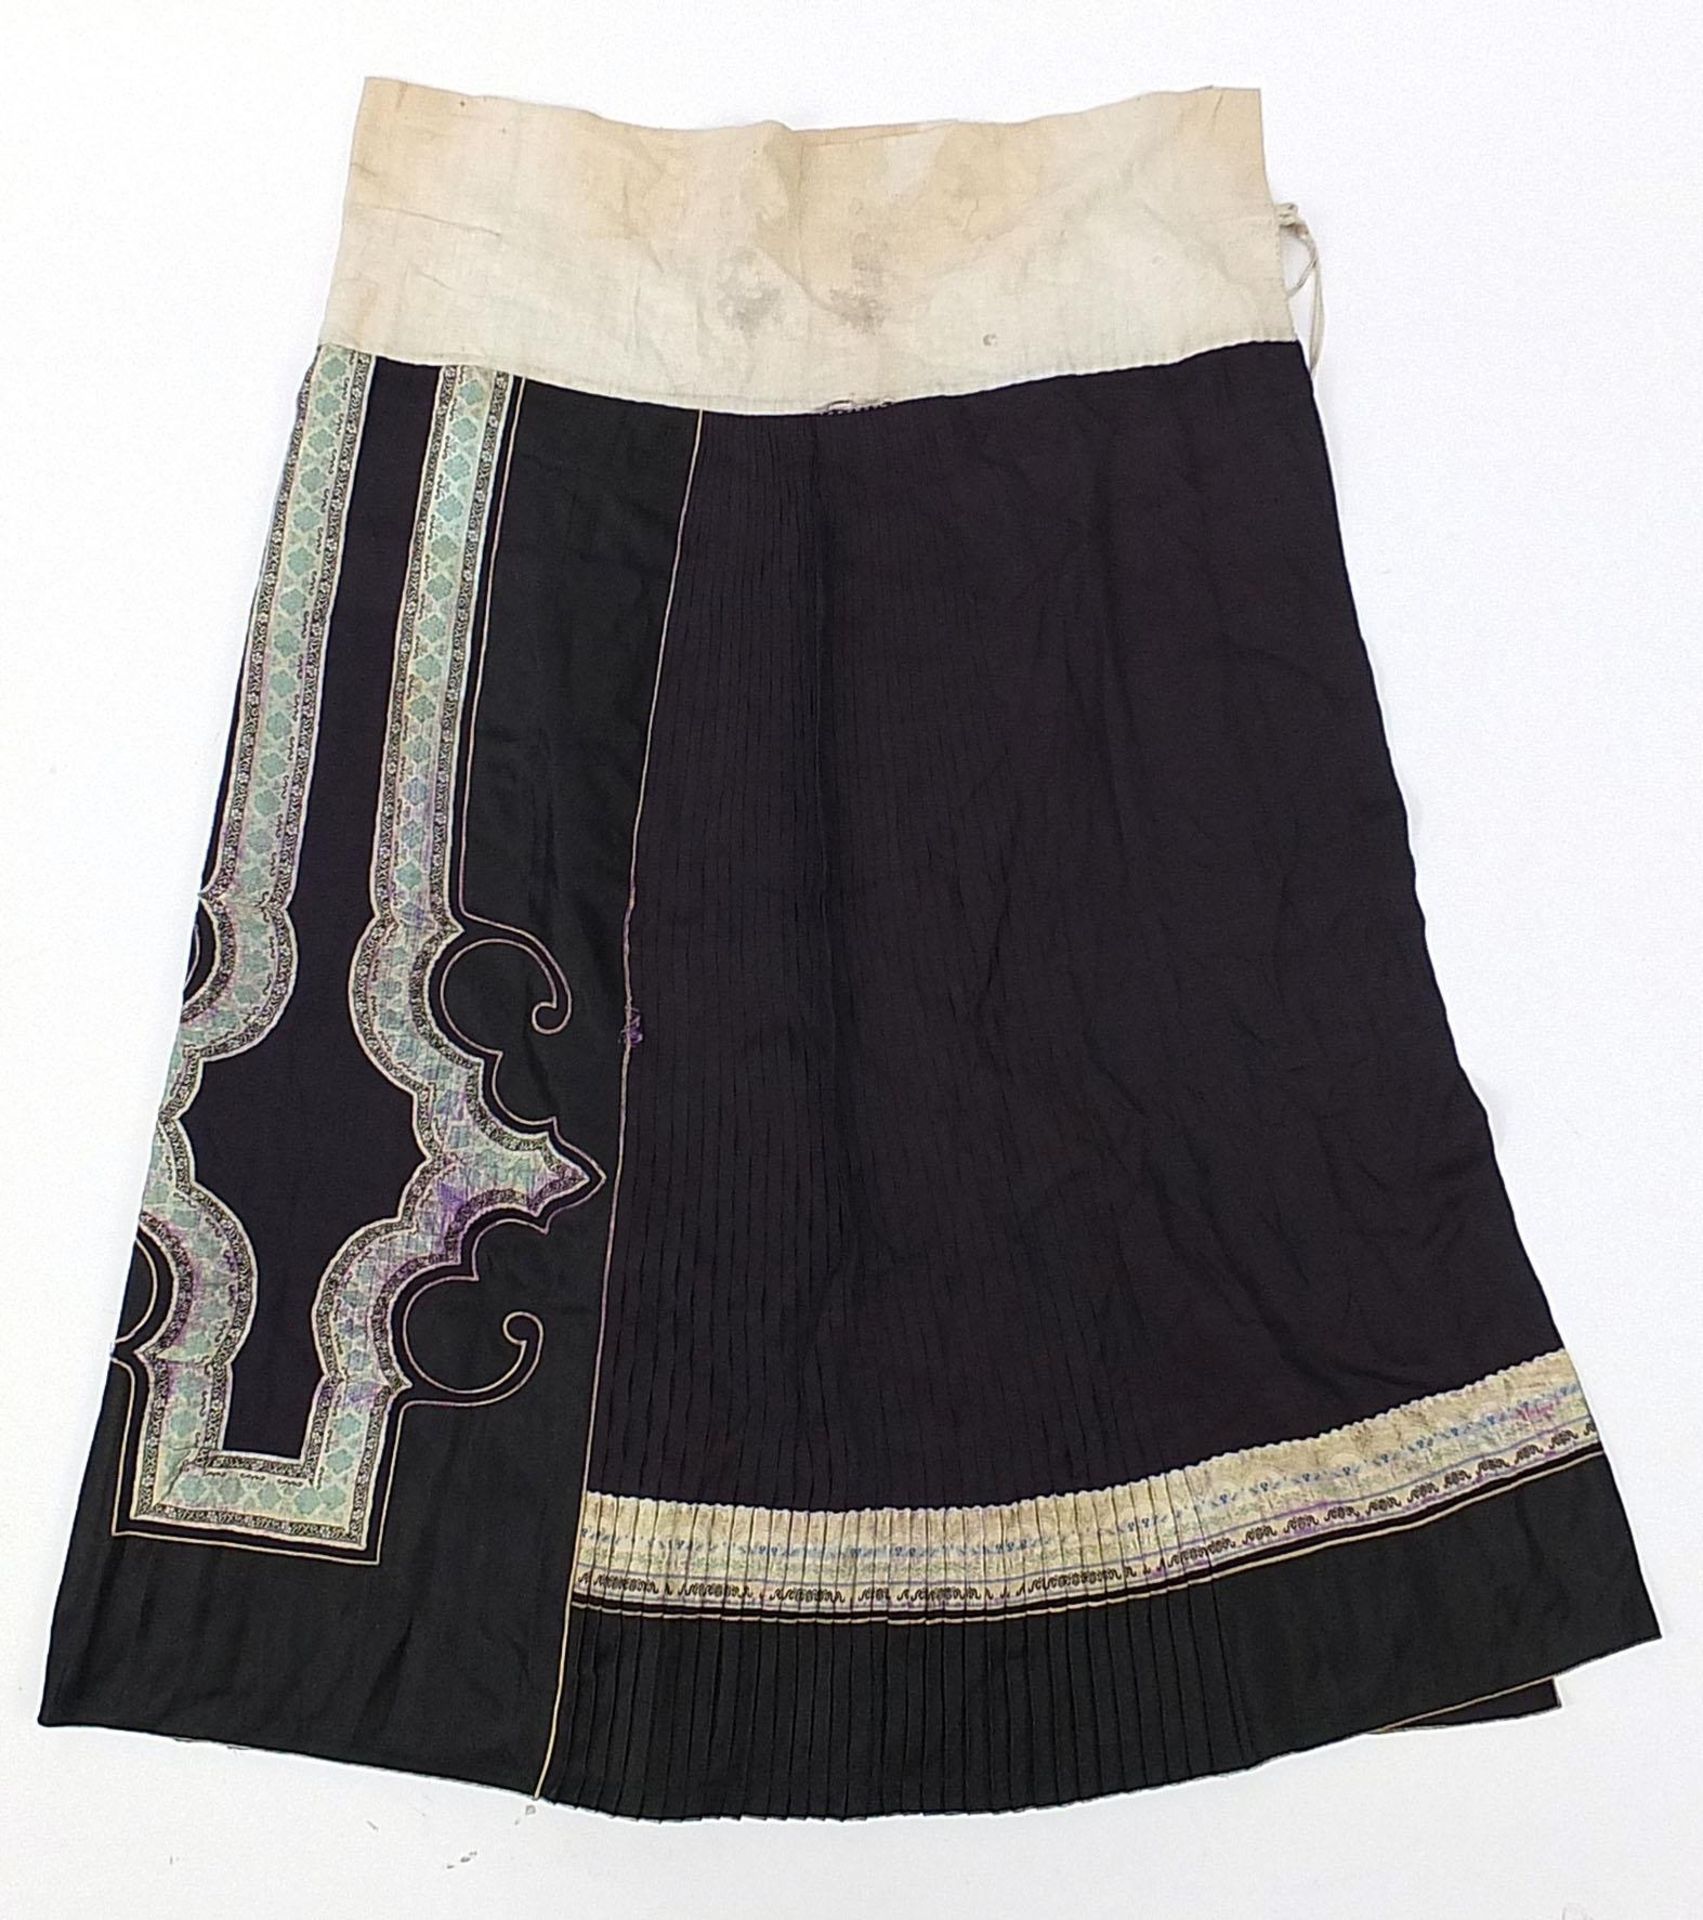 Chinese silk embroidered skirt with floral motifs, 98cm high - Image 6 of 9